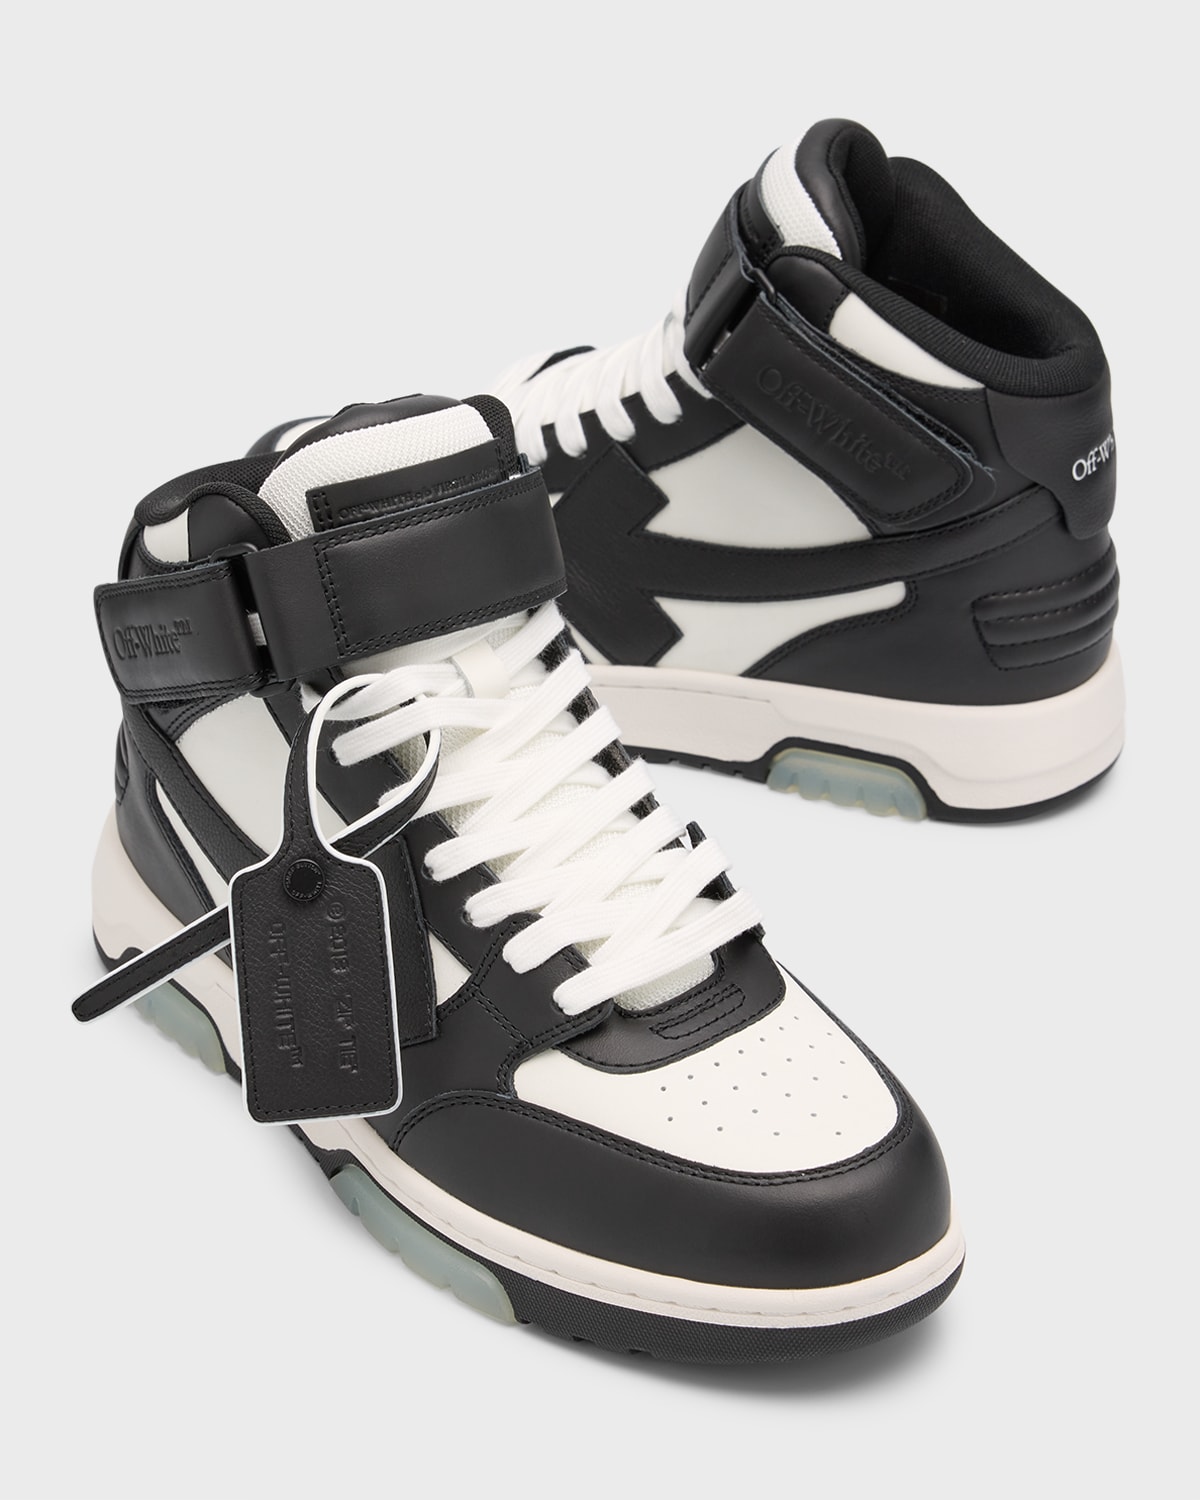 Louis Vuitton Spike Sneakers Poland, SAVE 30% 